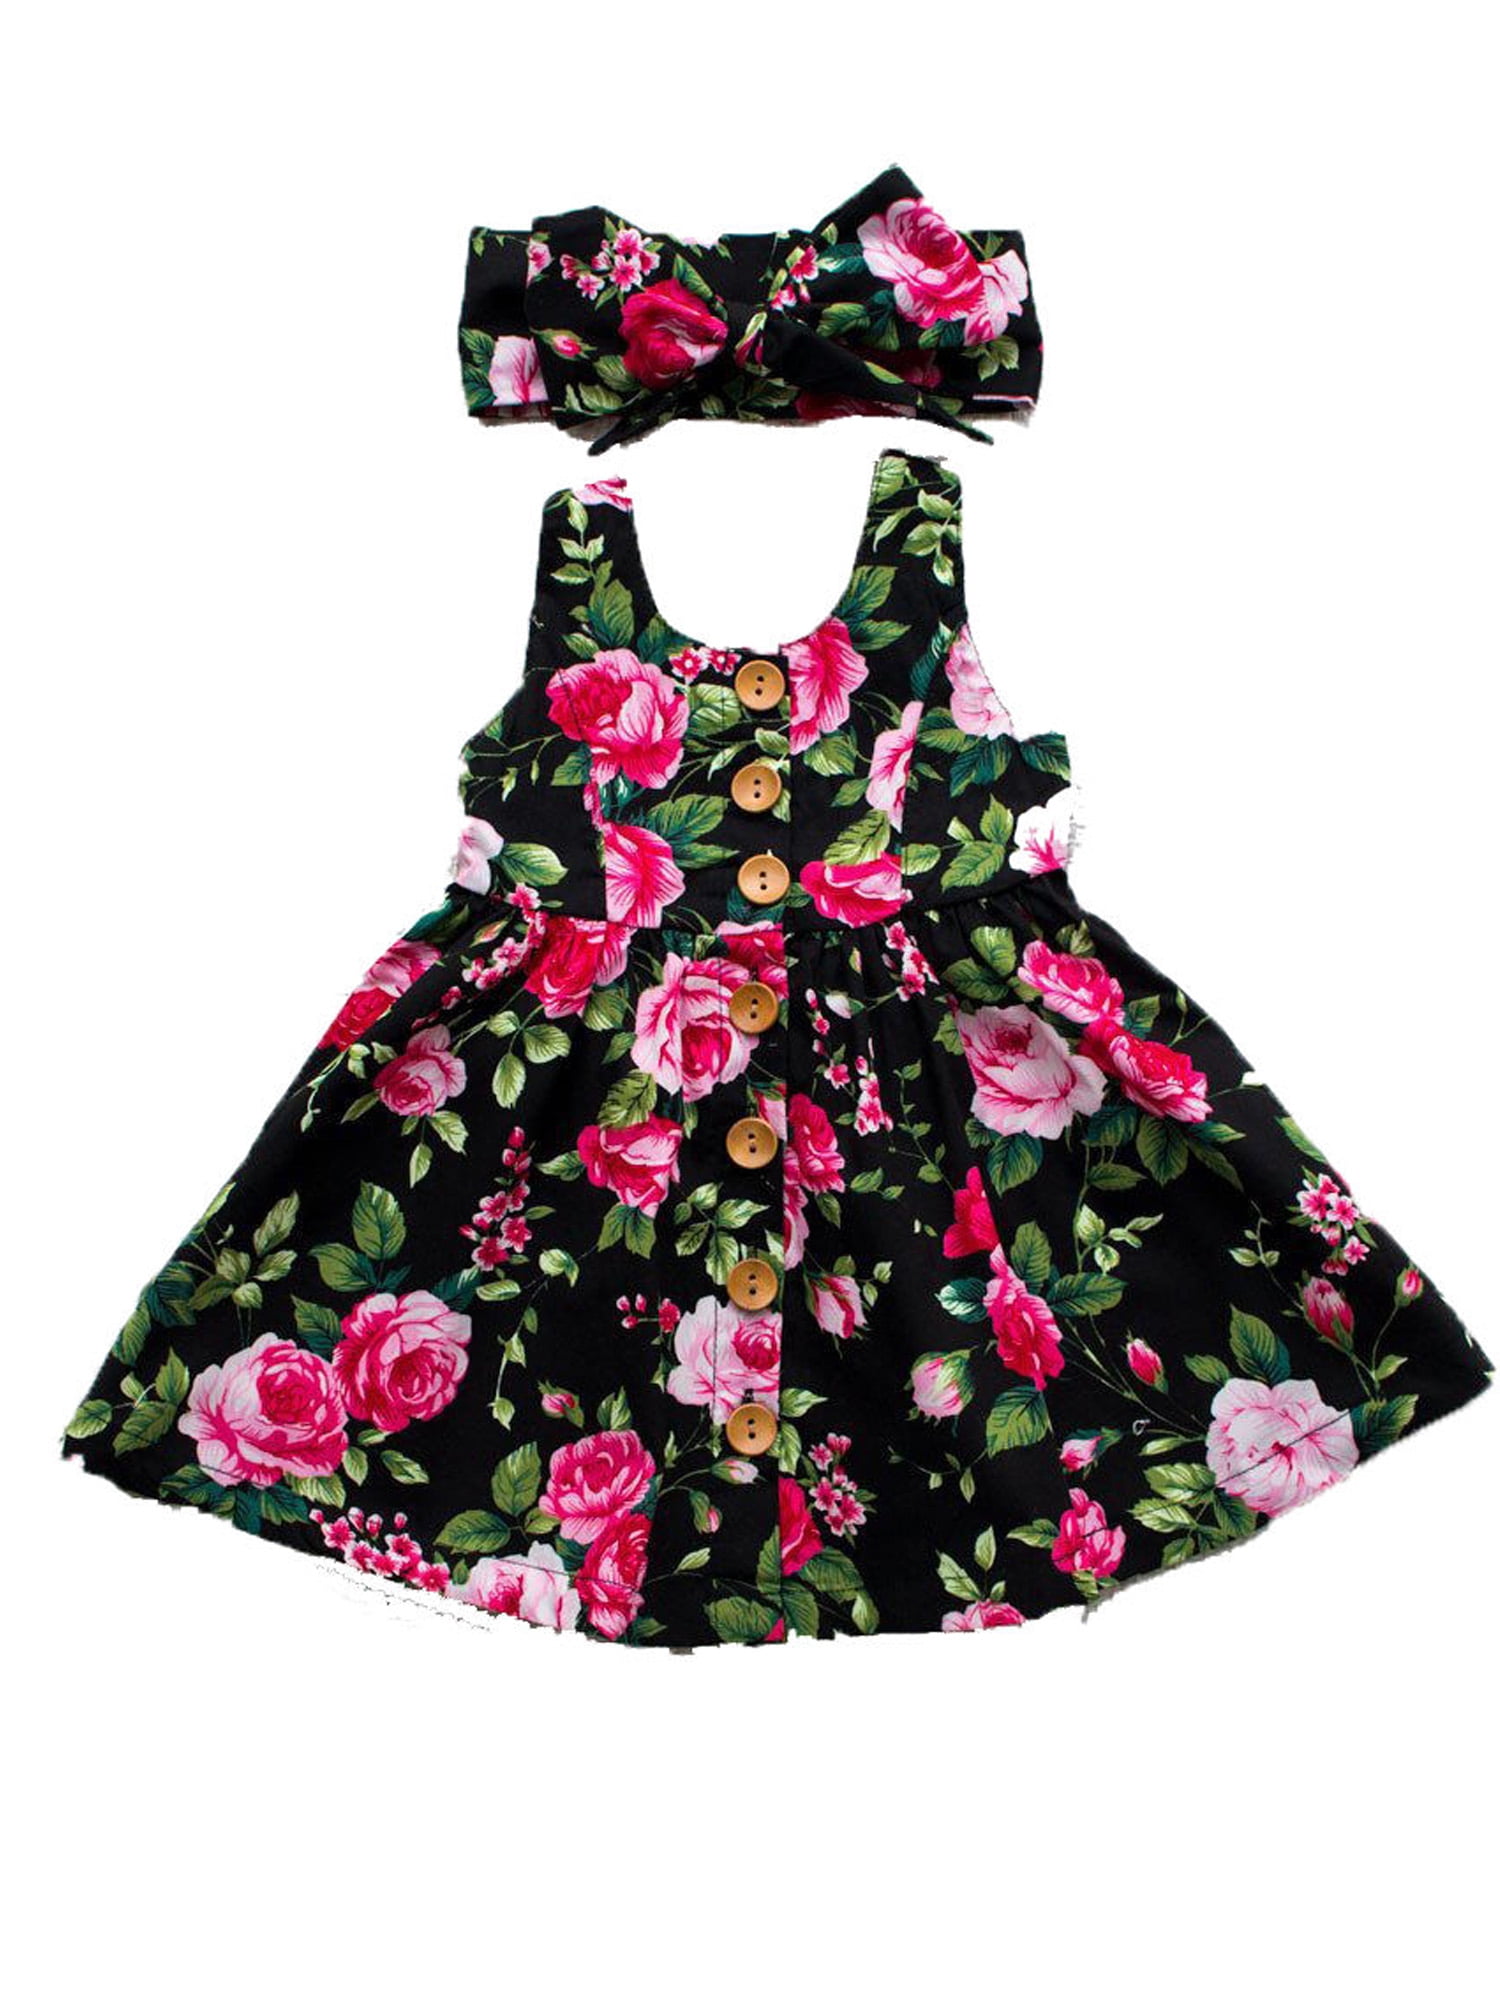 Cute Newborn Baby Girl Infant Floral ...